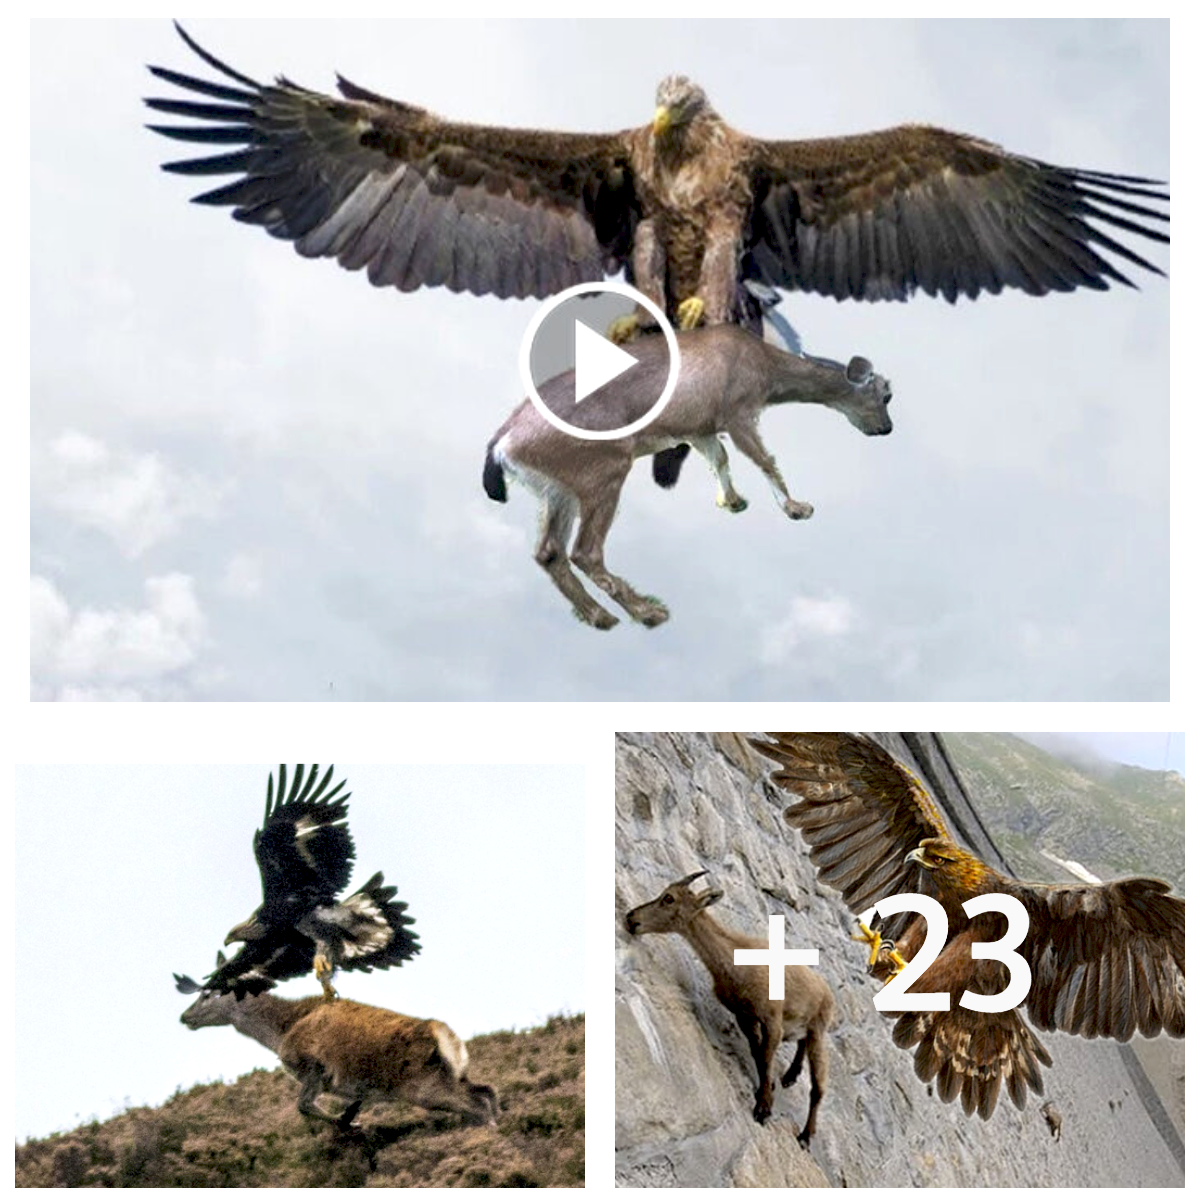 Eagle ᴀᴛᴛᴀᴄᴋs Mountain Goats On Cliff, Let’s See How It Uses Strength And Special Sᴋɪʟʟs To Capture A Goat